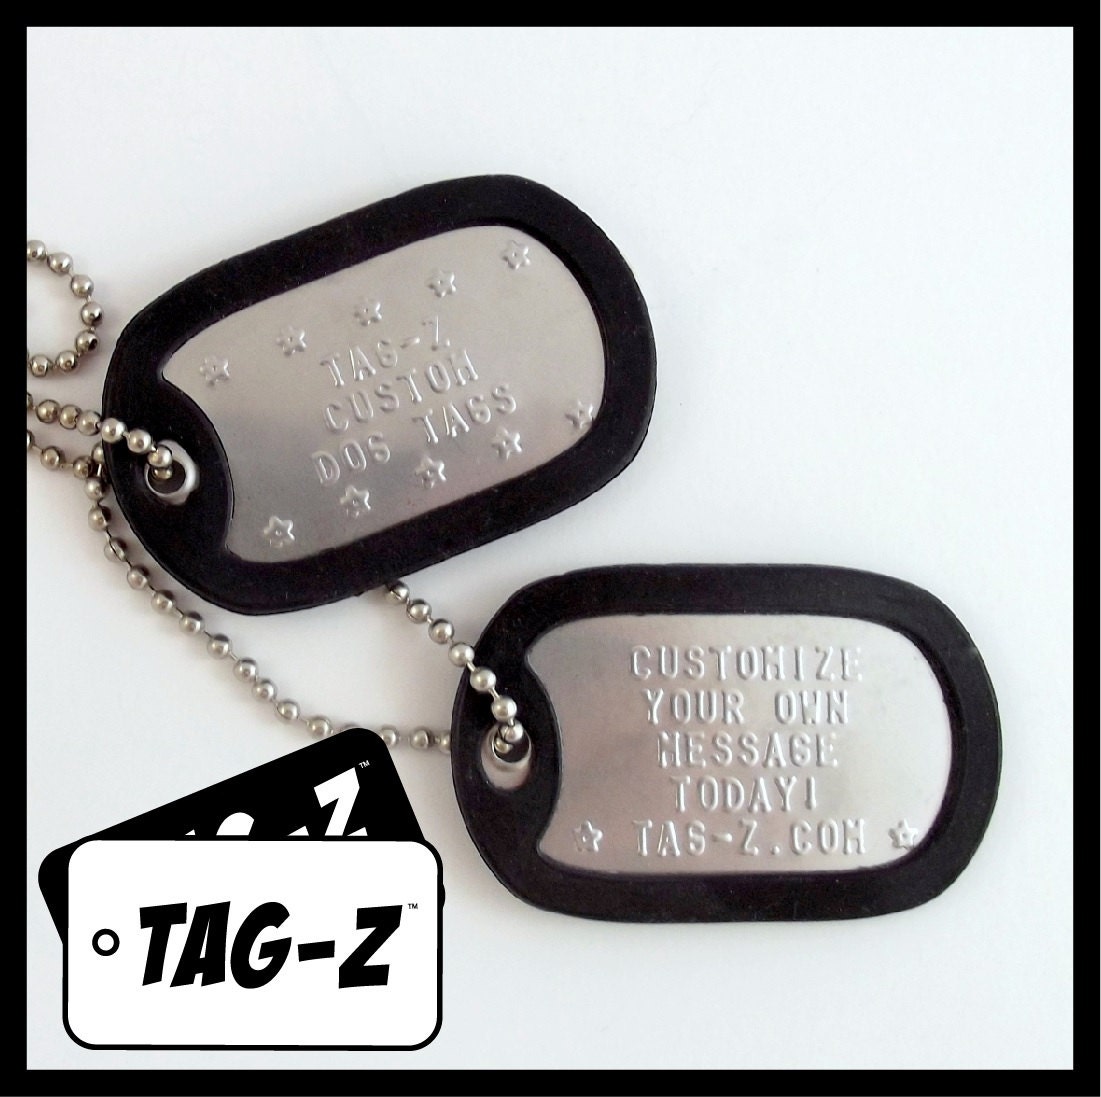 stainless steel military dog tags